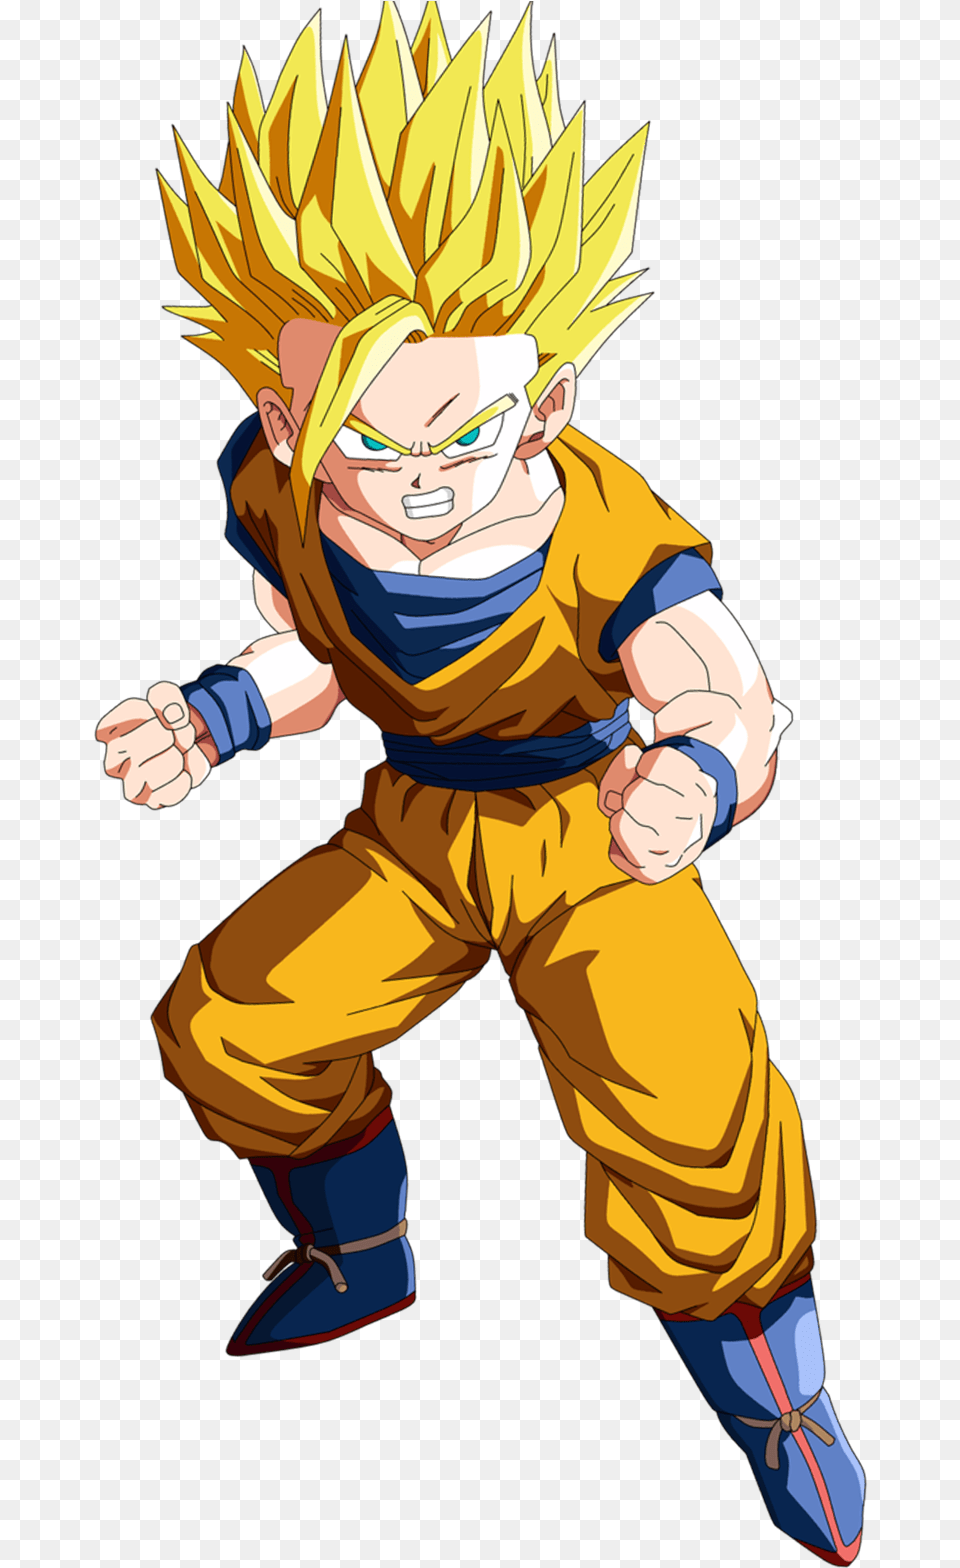 Who Also Wants This Gohan Next Dragonballlegends Gohan Dragon Ball Z, Book, Comics, Publication, Baby Png Image